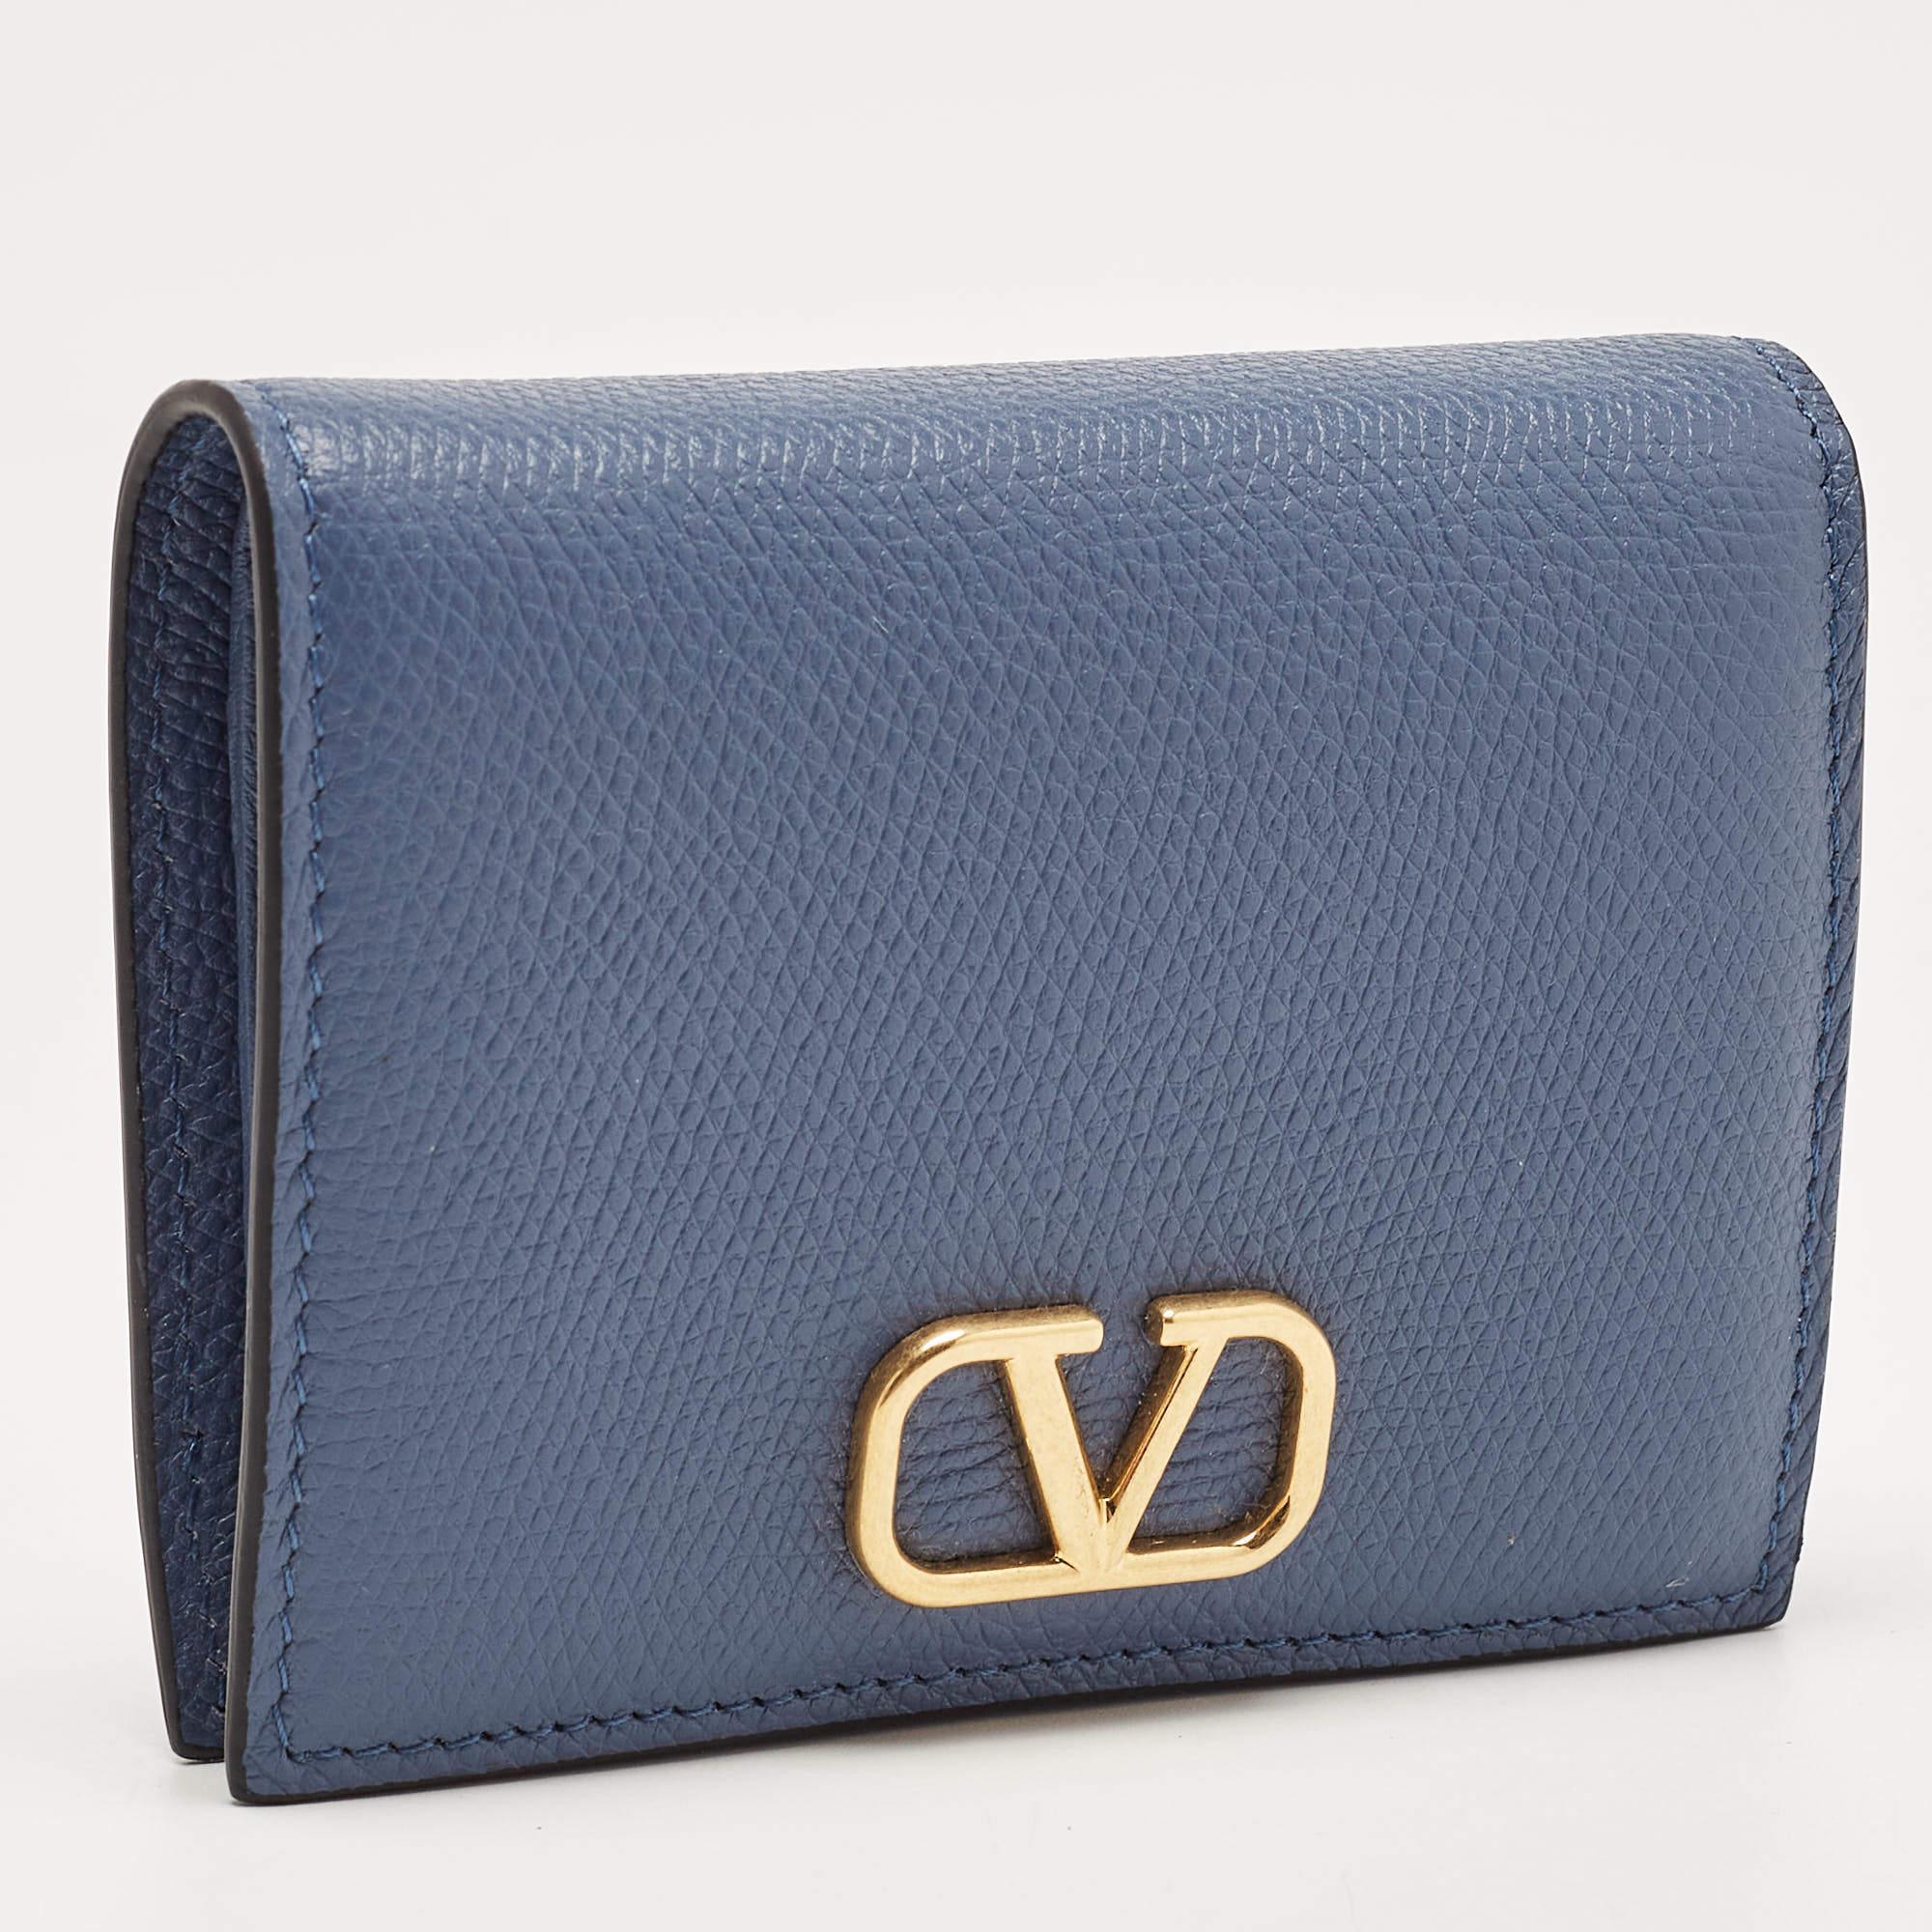 This wallet is conveniently designed for everyday use. It comes with a well-structured interior for you to neatly arrange your cards and cash. This stylish piece is complete with a sleek appeal.

